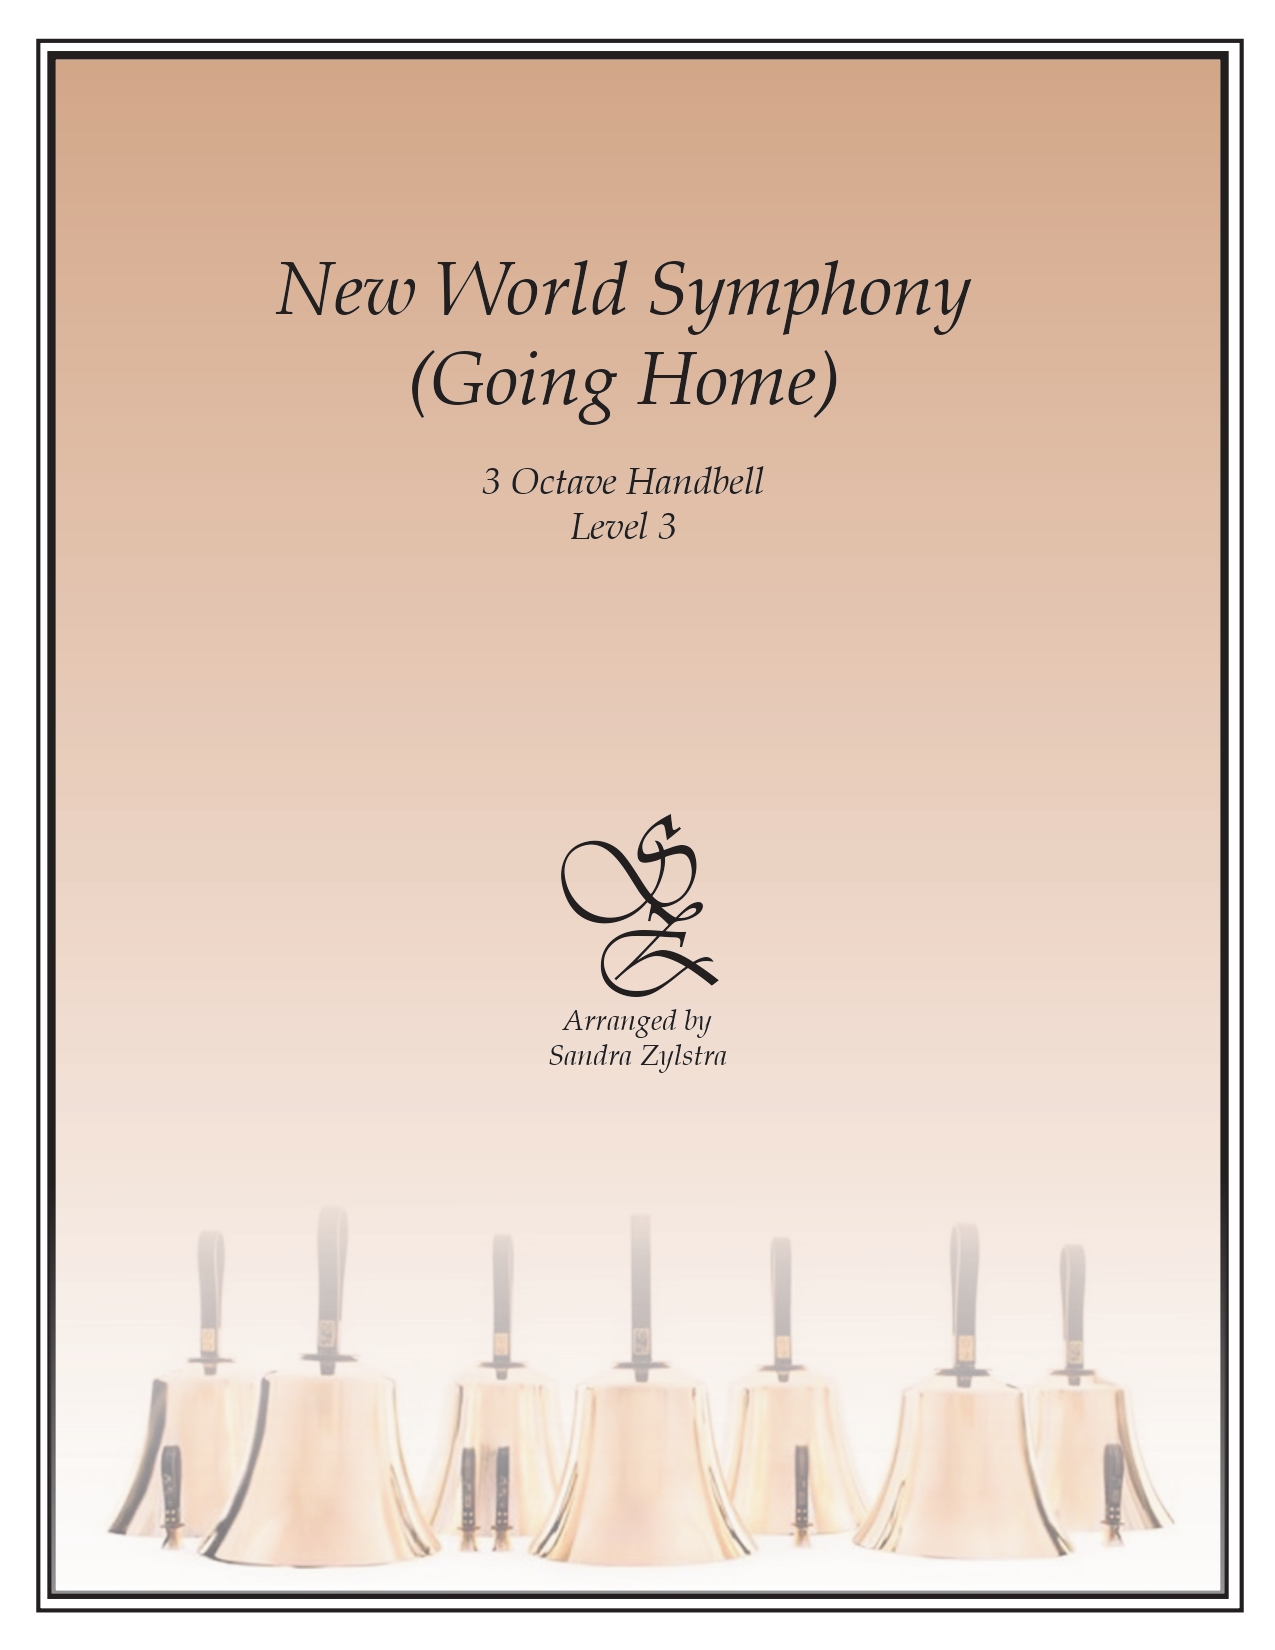 New World Symphony Going Home 3 octave handbells cover page 00011